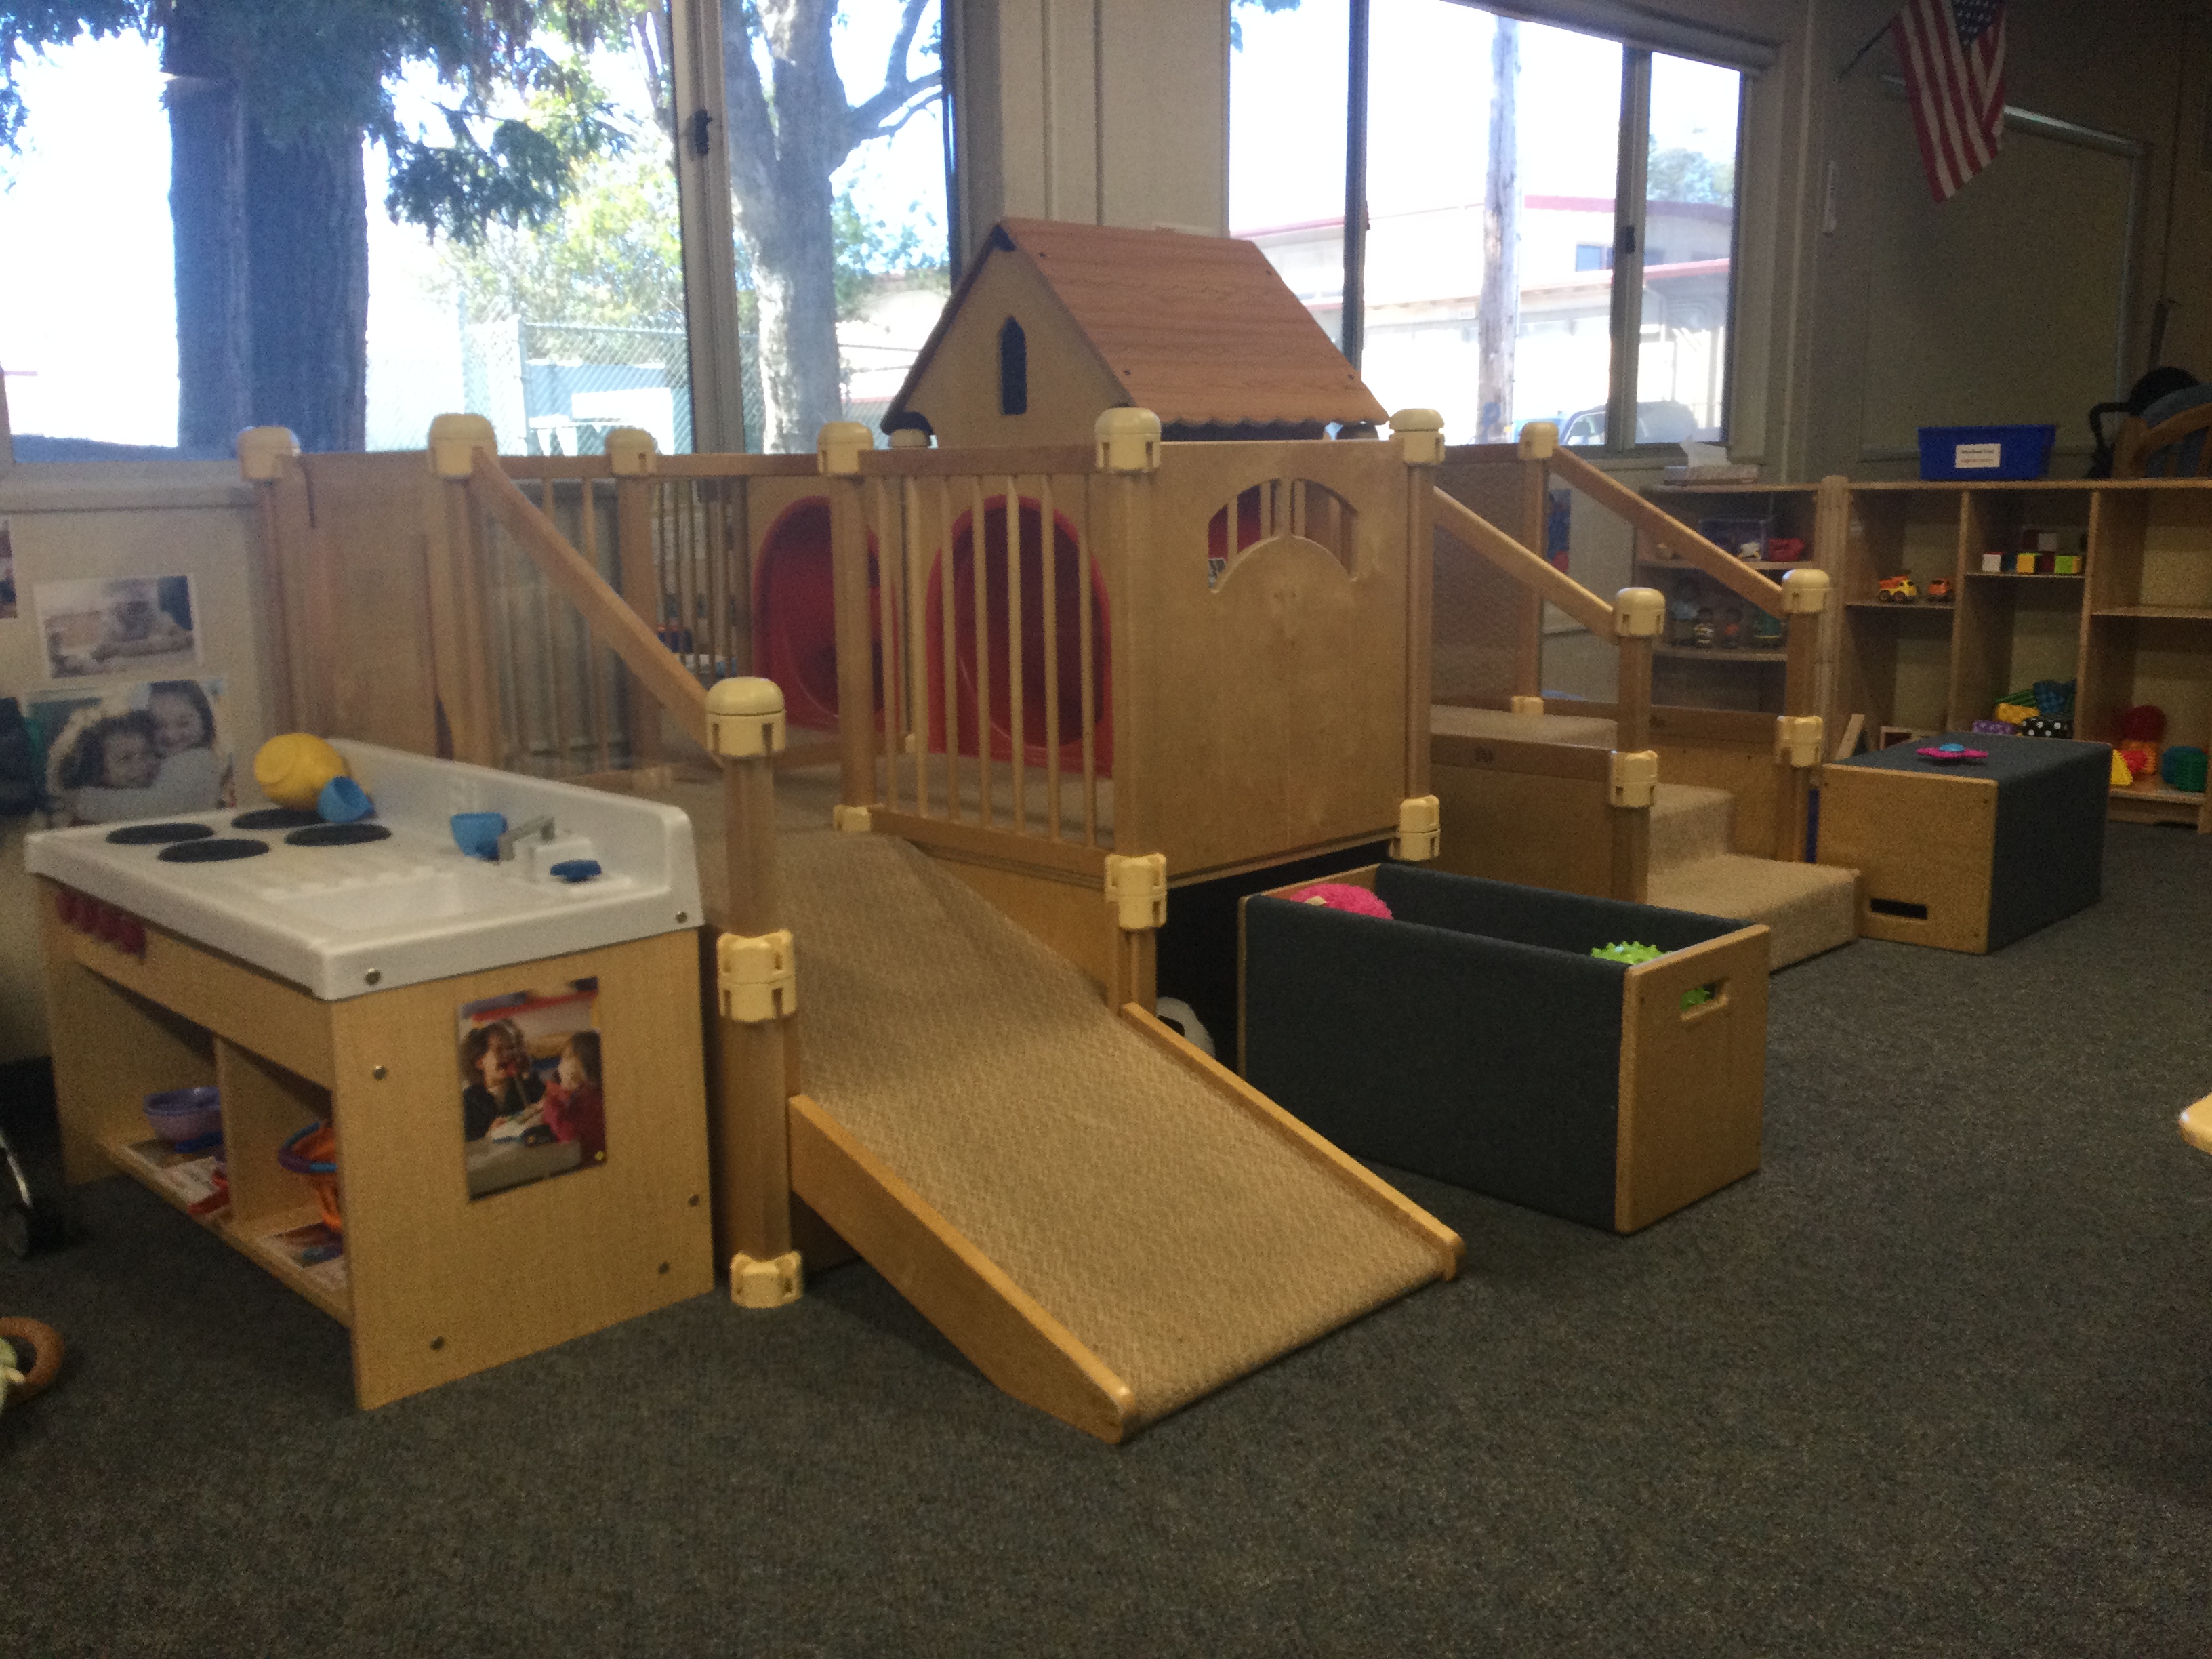 Wooden infant play structure in classroom 